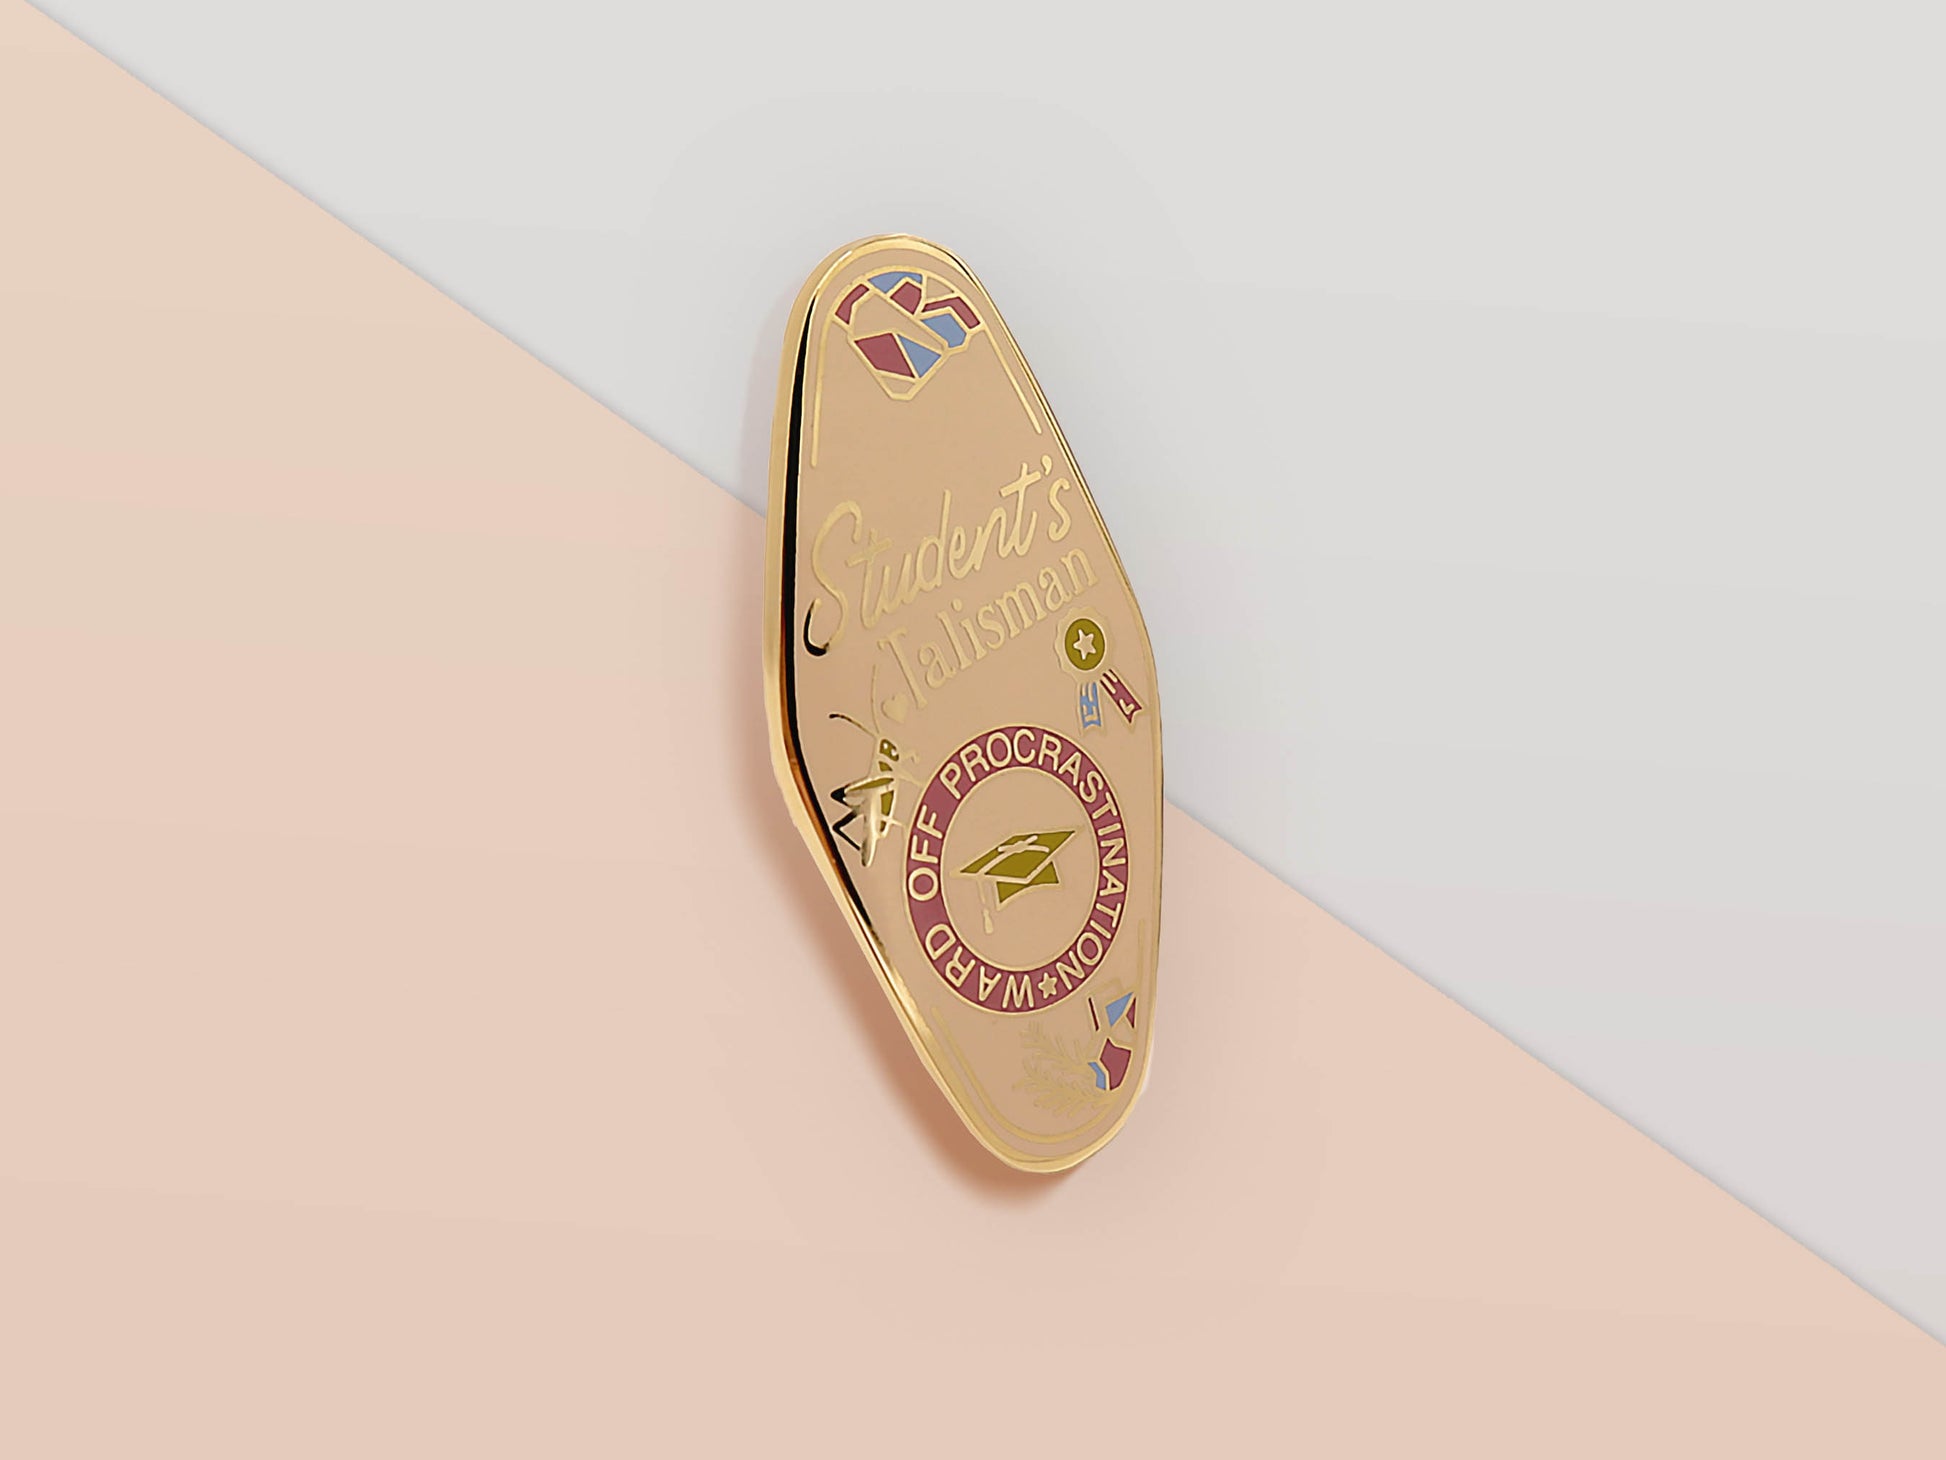 Gold Enamel Talisman Pin with white design and the words Student's Talisman, Ward of procrastination. The pins design includes a graduation cap and a rosette, a grass hopper, as well as plants and crystals.